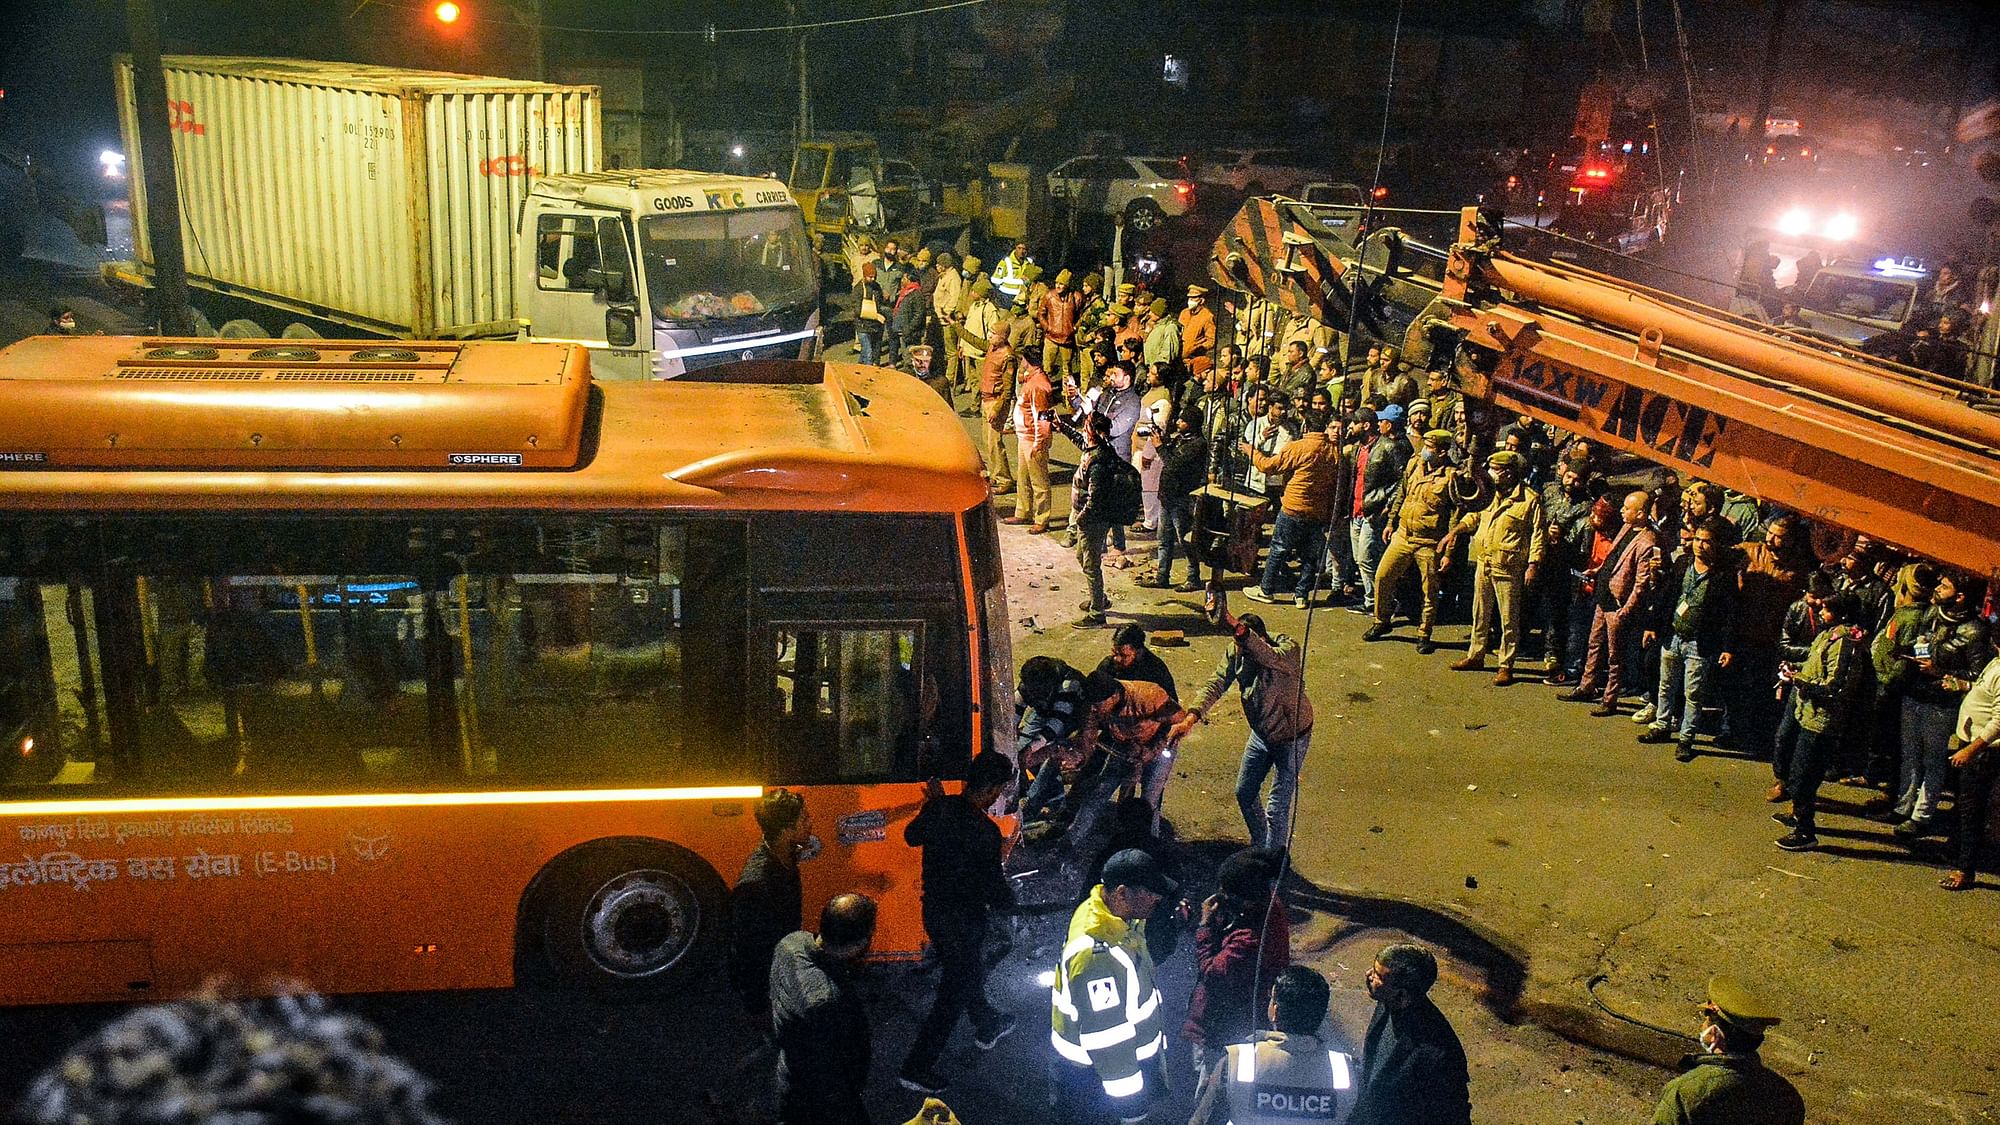 <div class="paragraphs"><p>Mangled remains of an electric bus after it lost control and mowed down several bystanders near the Tat Mill crossroad in Kanpur on Sunday, 30 January.</p></div>